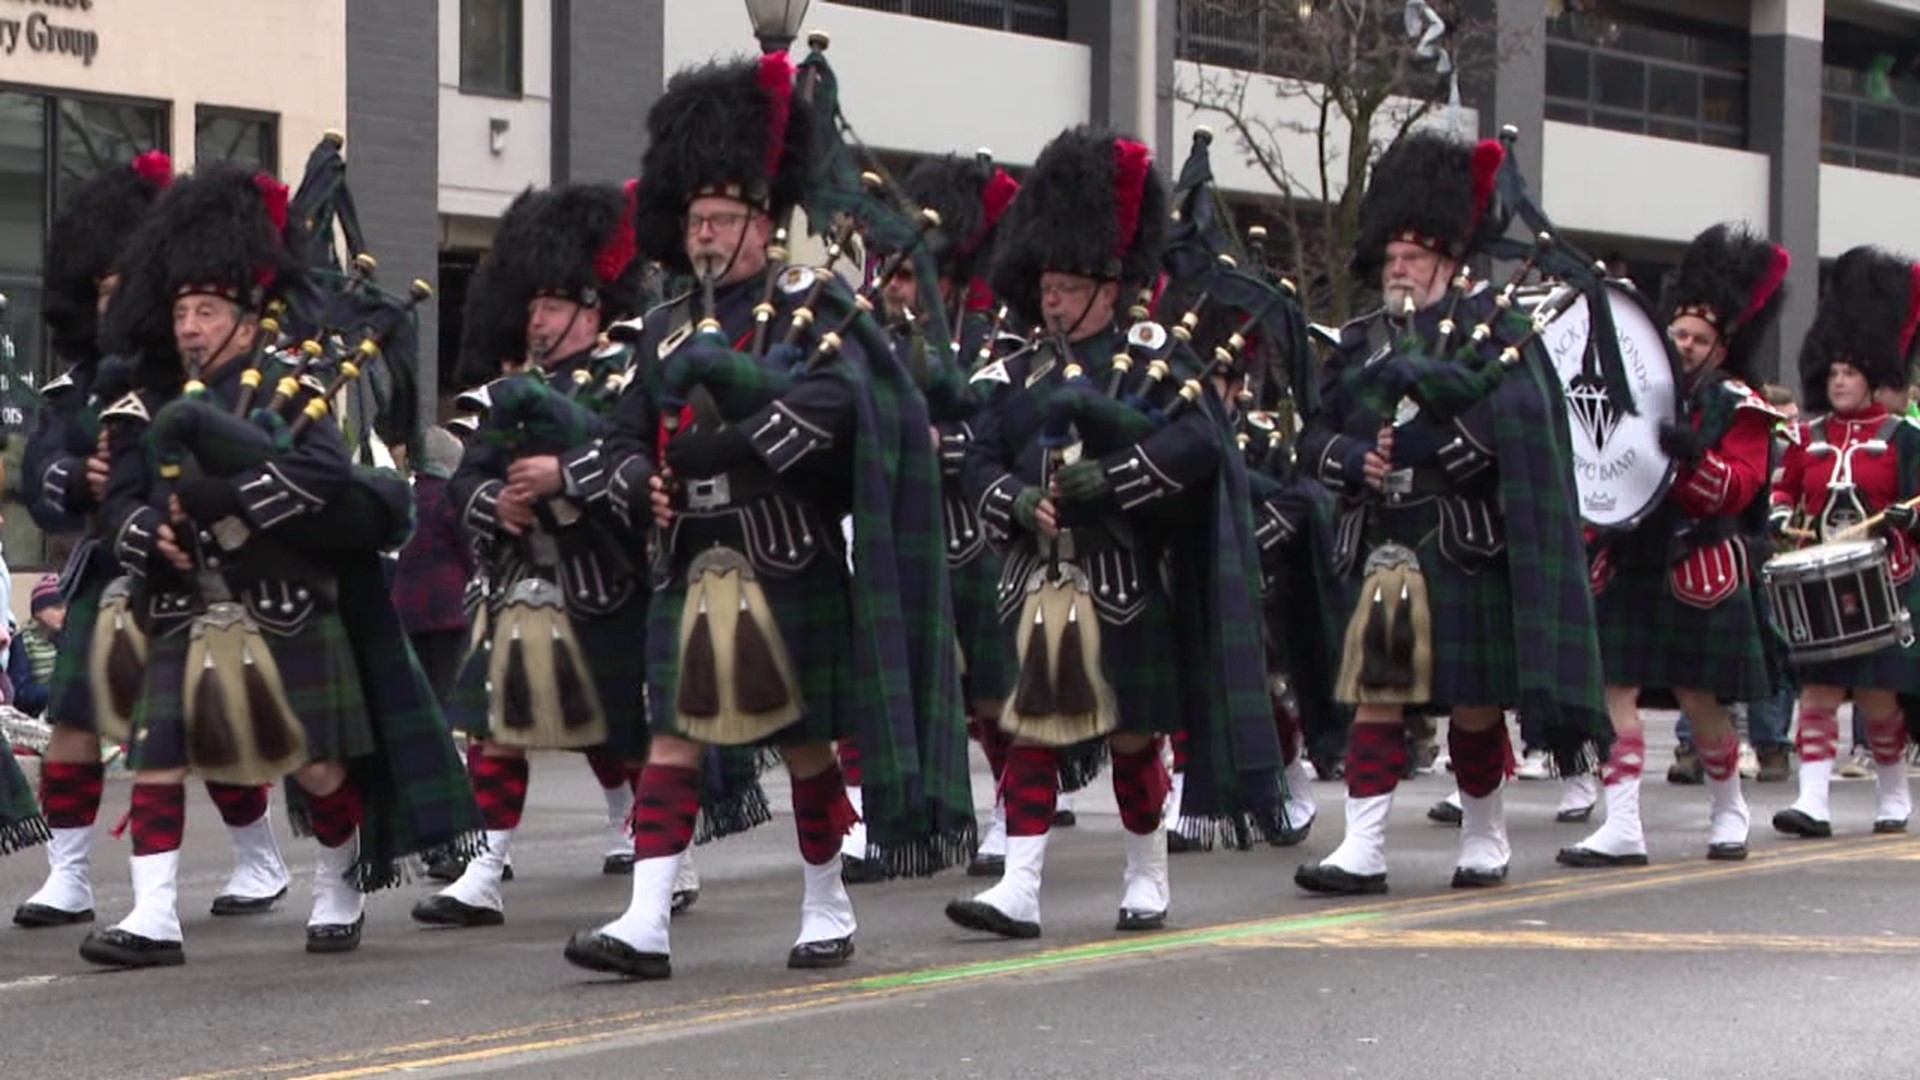 Thousands flocked to downtown Scranton Saturday for one of the biggest St. Patrick's celebrations in the country.